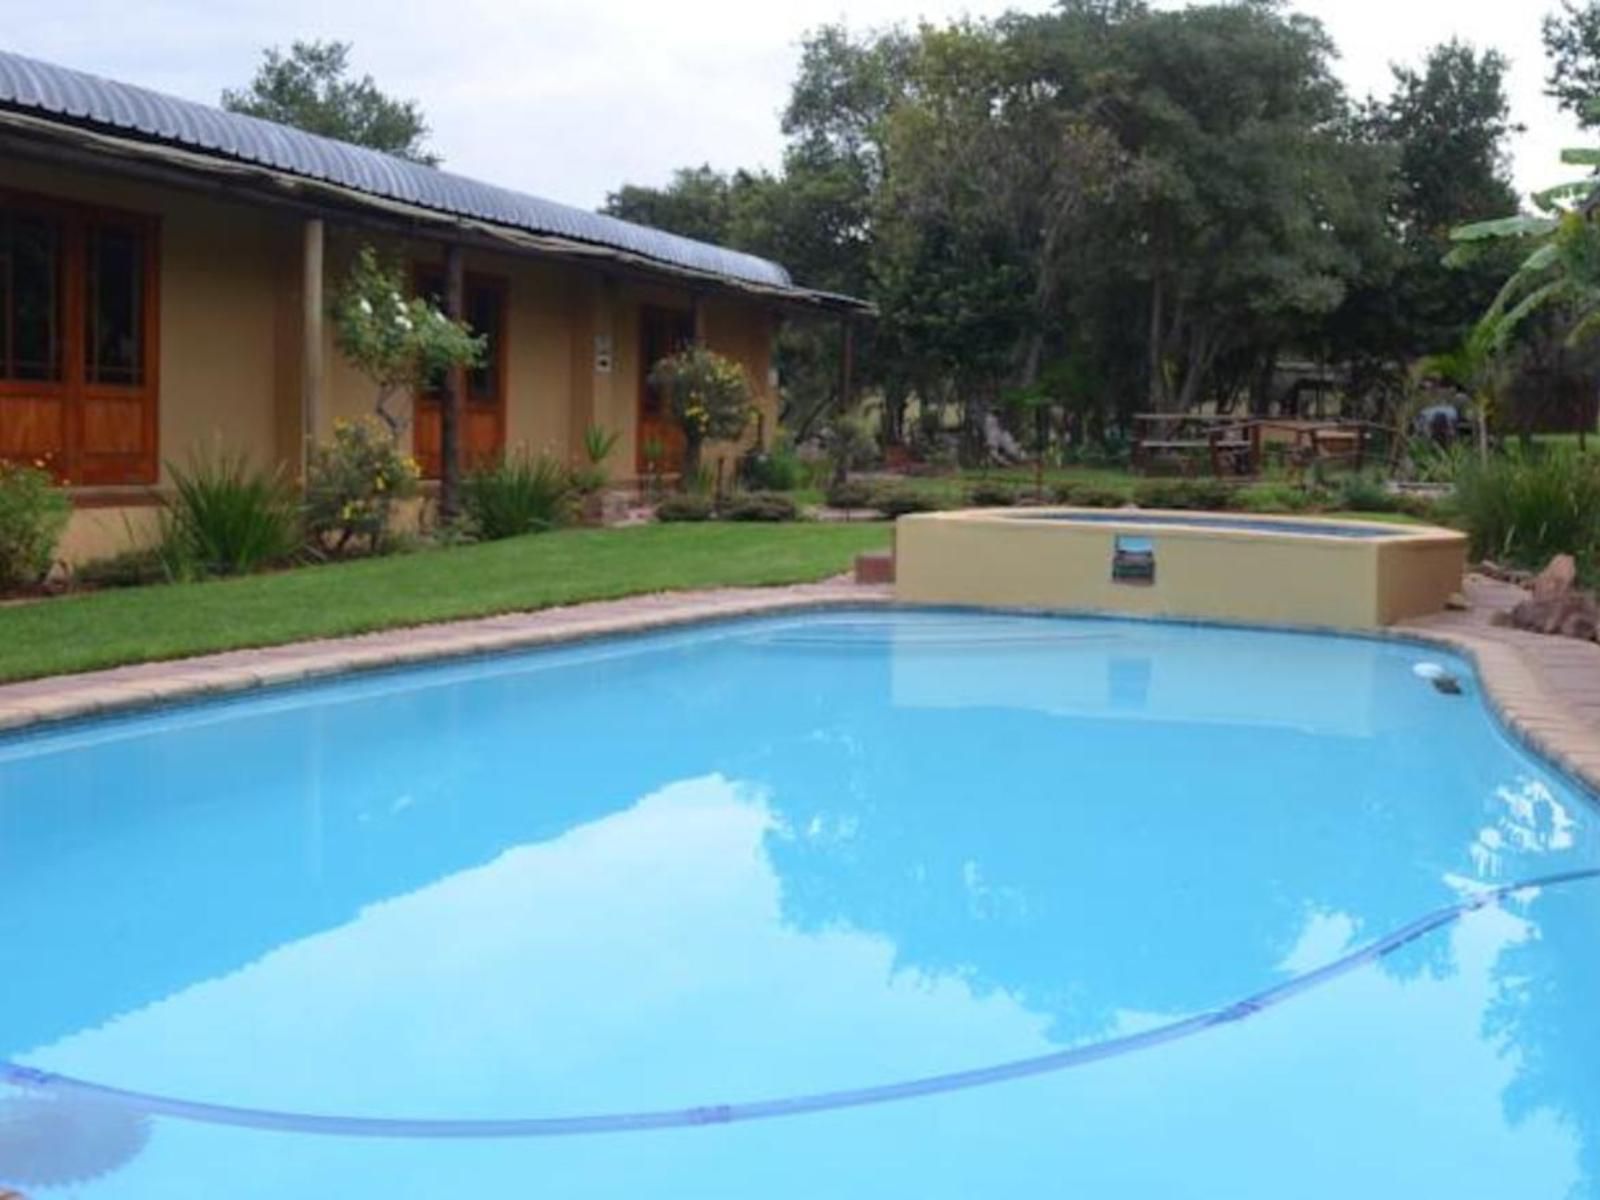 Mon Repos Guest Farm Bela Bela Warmbaths Limpopo Province South Africa Palm Tree, Plant, Nature, Wood, Swimming Pool